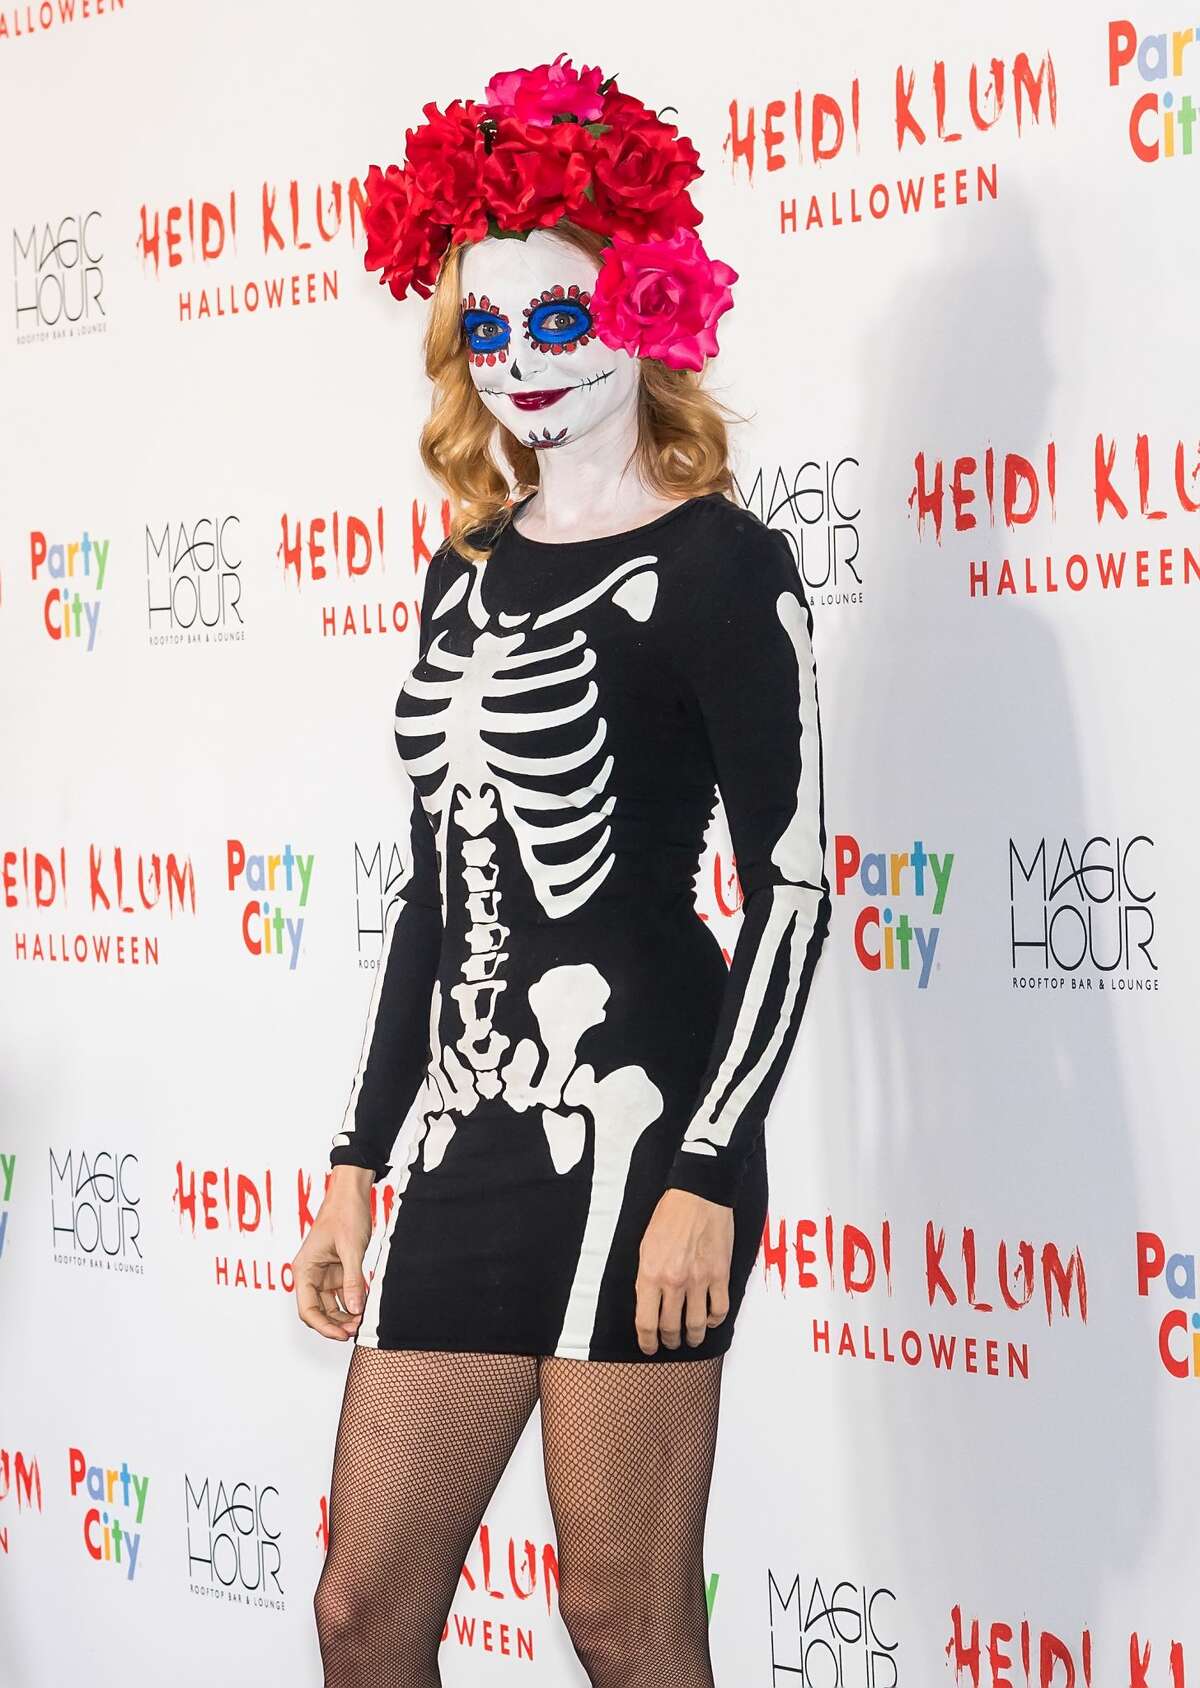 Actress Heather Graham is seen during Heidi Klum's 18th Annual Halloween Party at Magic Hour Rooftop Bar & Lounge on October 31, 2017 in New York City.